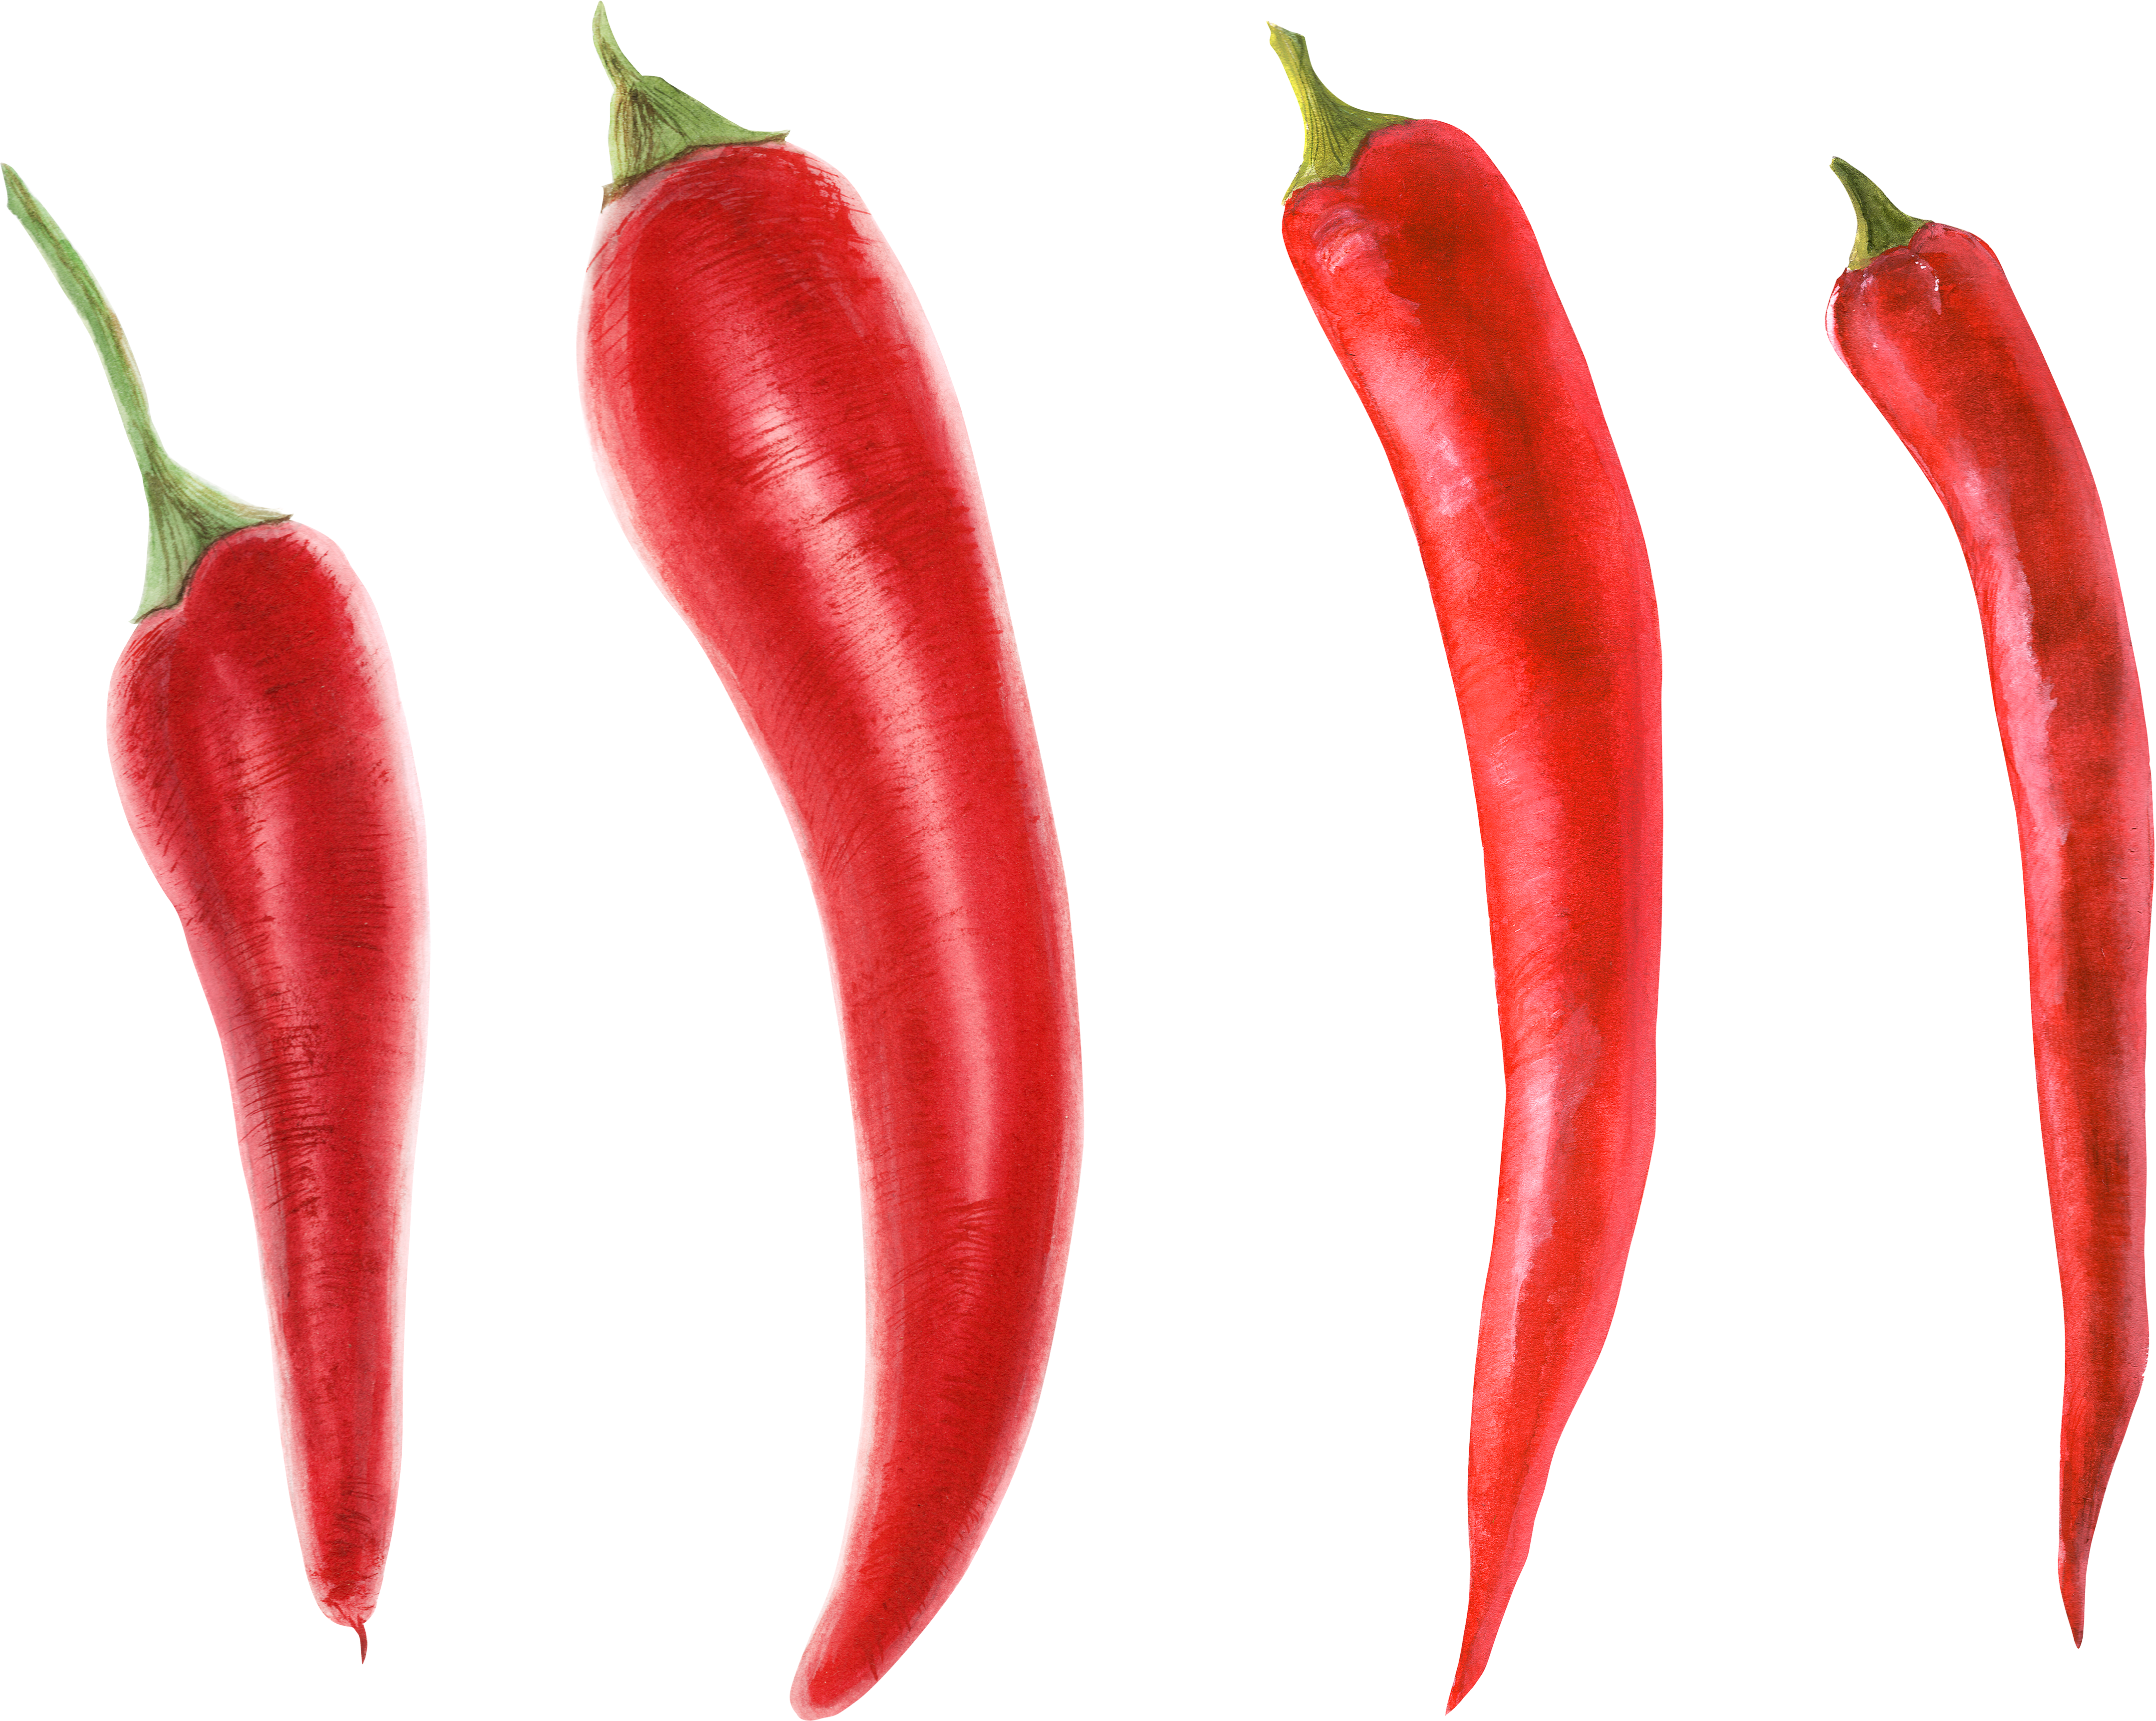 Chili Pepper Background Images – Browse 34 Stock Photos, Vectors